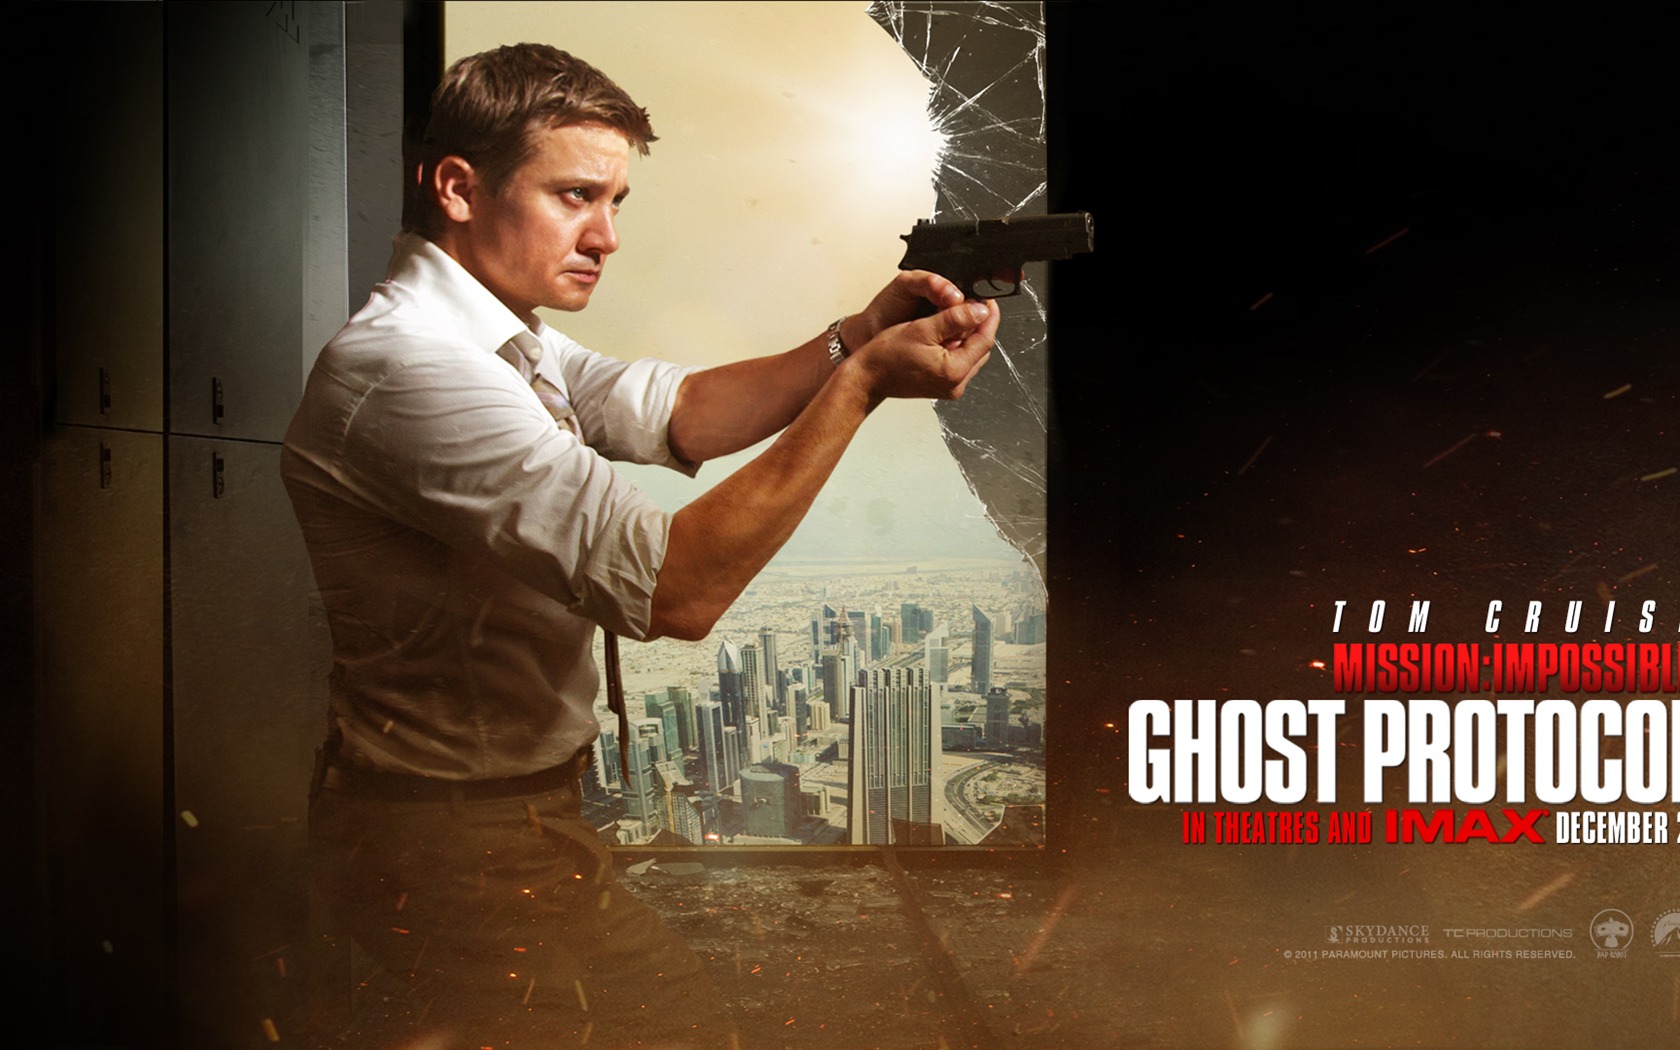 Mission: Impossible - Ghost Protocol 碟中谍4 高清壁纸2 - 1680x1050